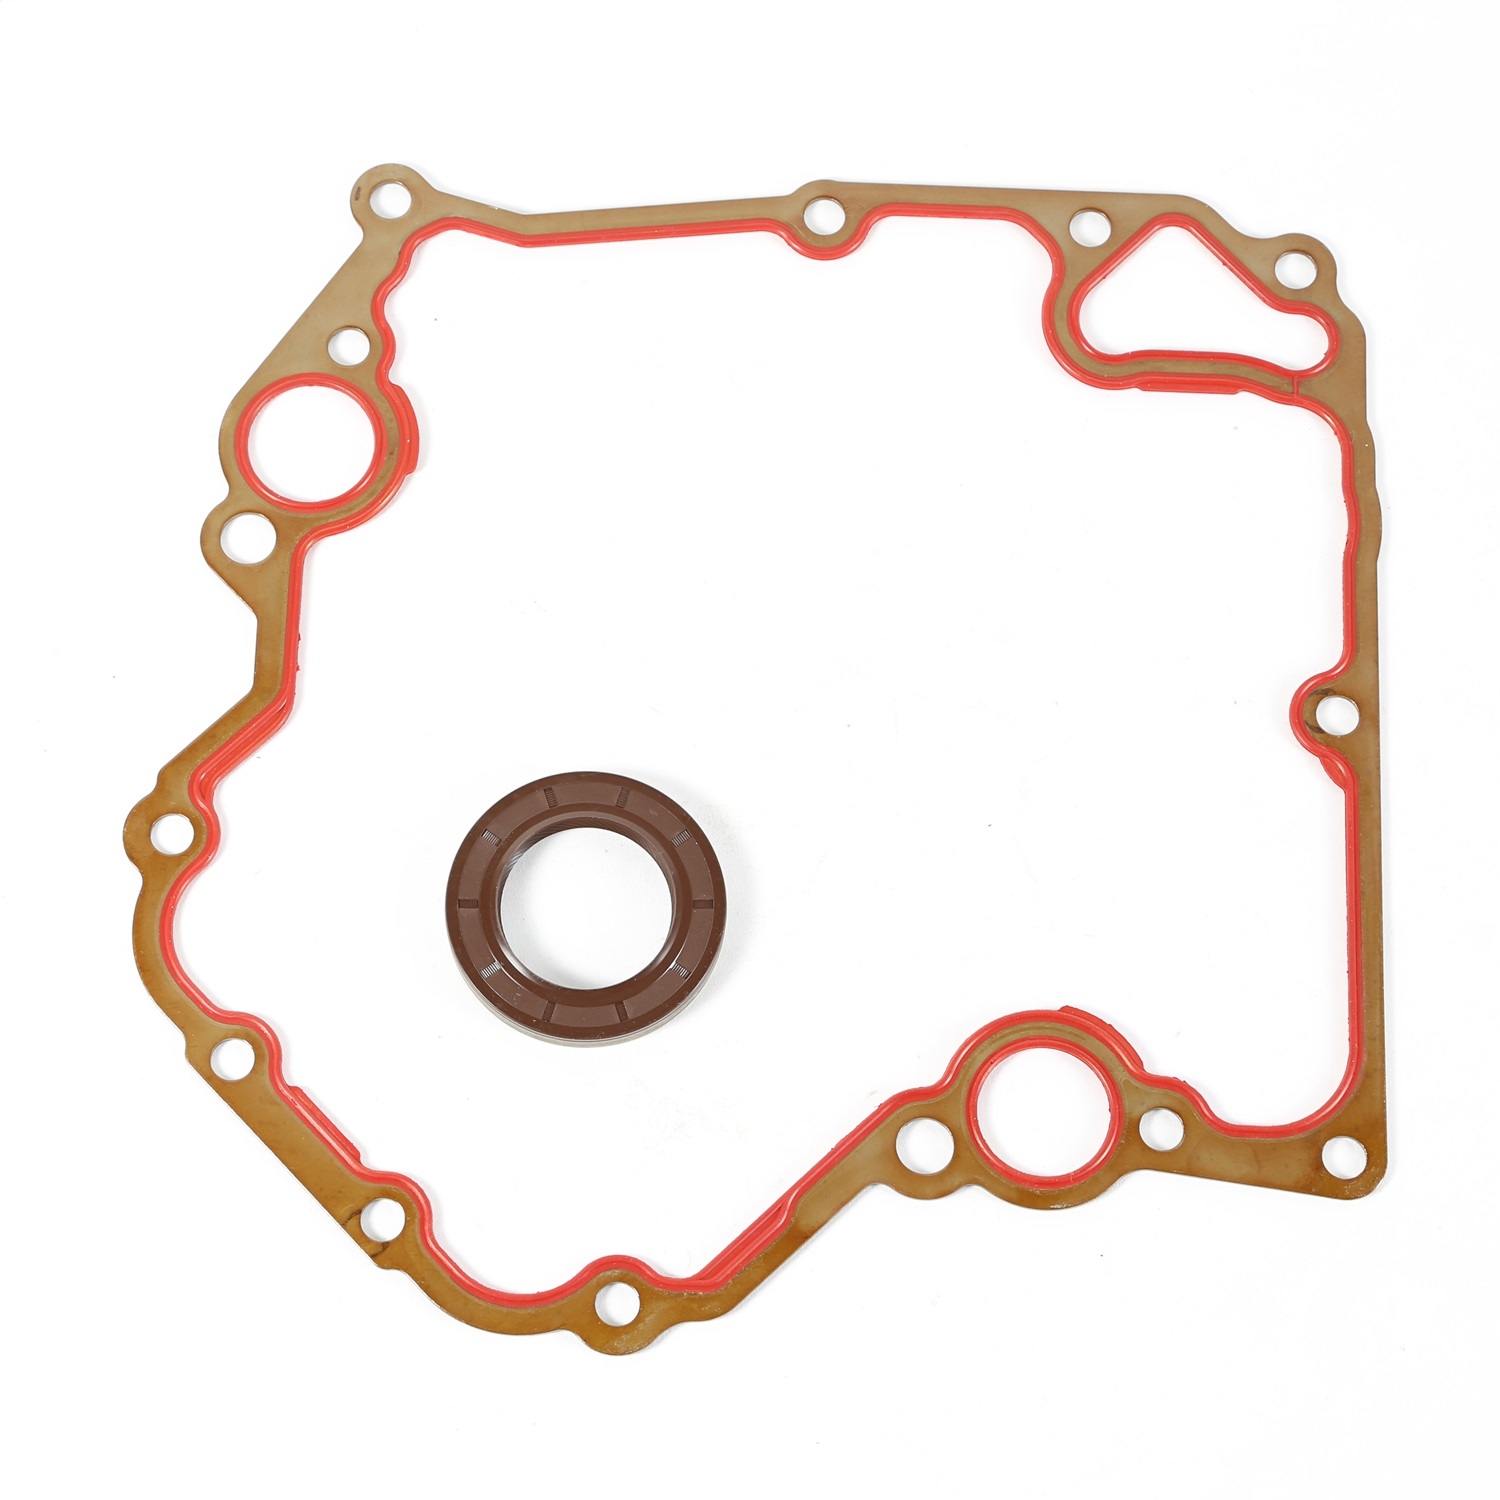 Omix This Timing Cover Gasket Set From Omix Fits The 4.7L Engine In 99-03 Jeep Grand Cherokee.,